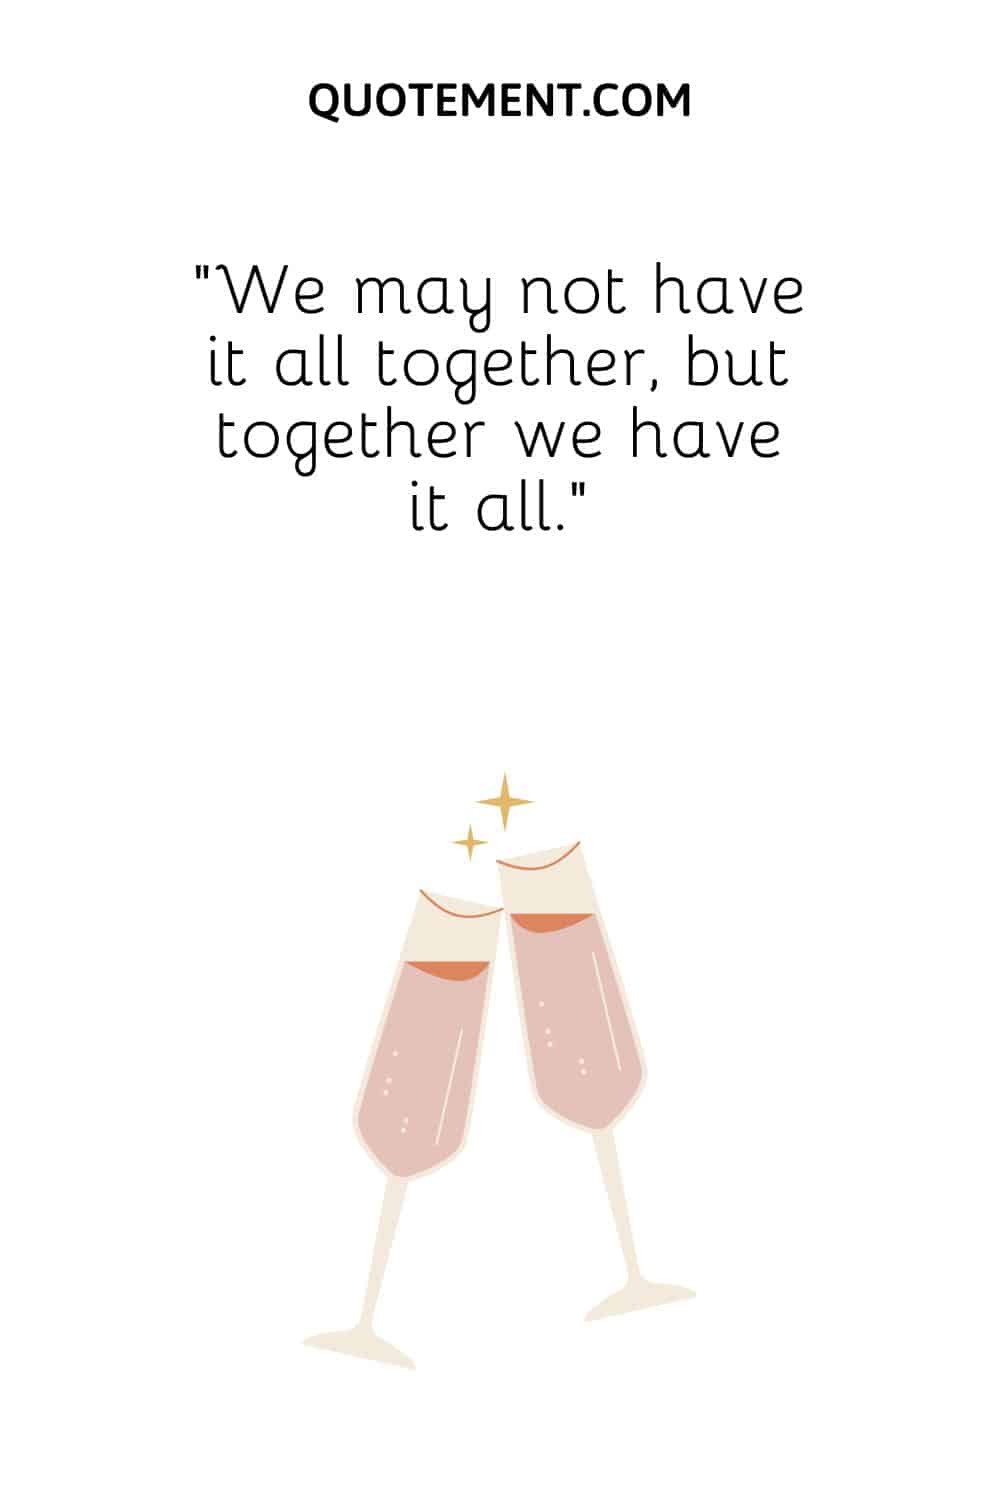 We may not have it all together, but together we have it all.